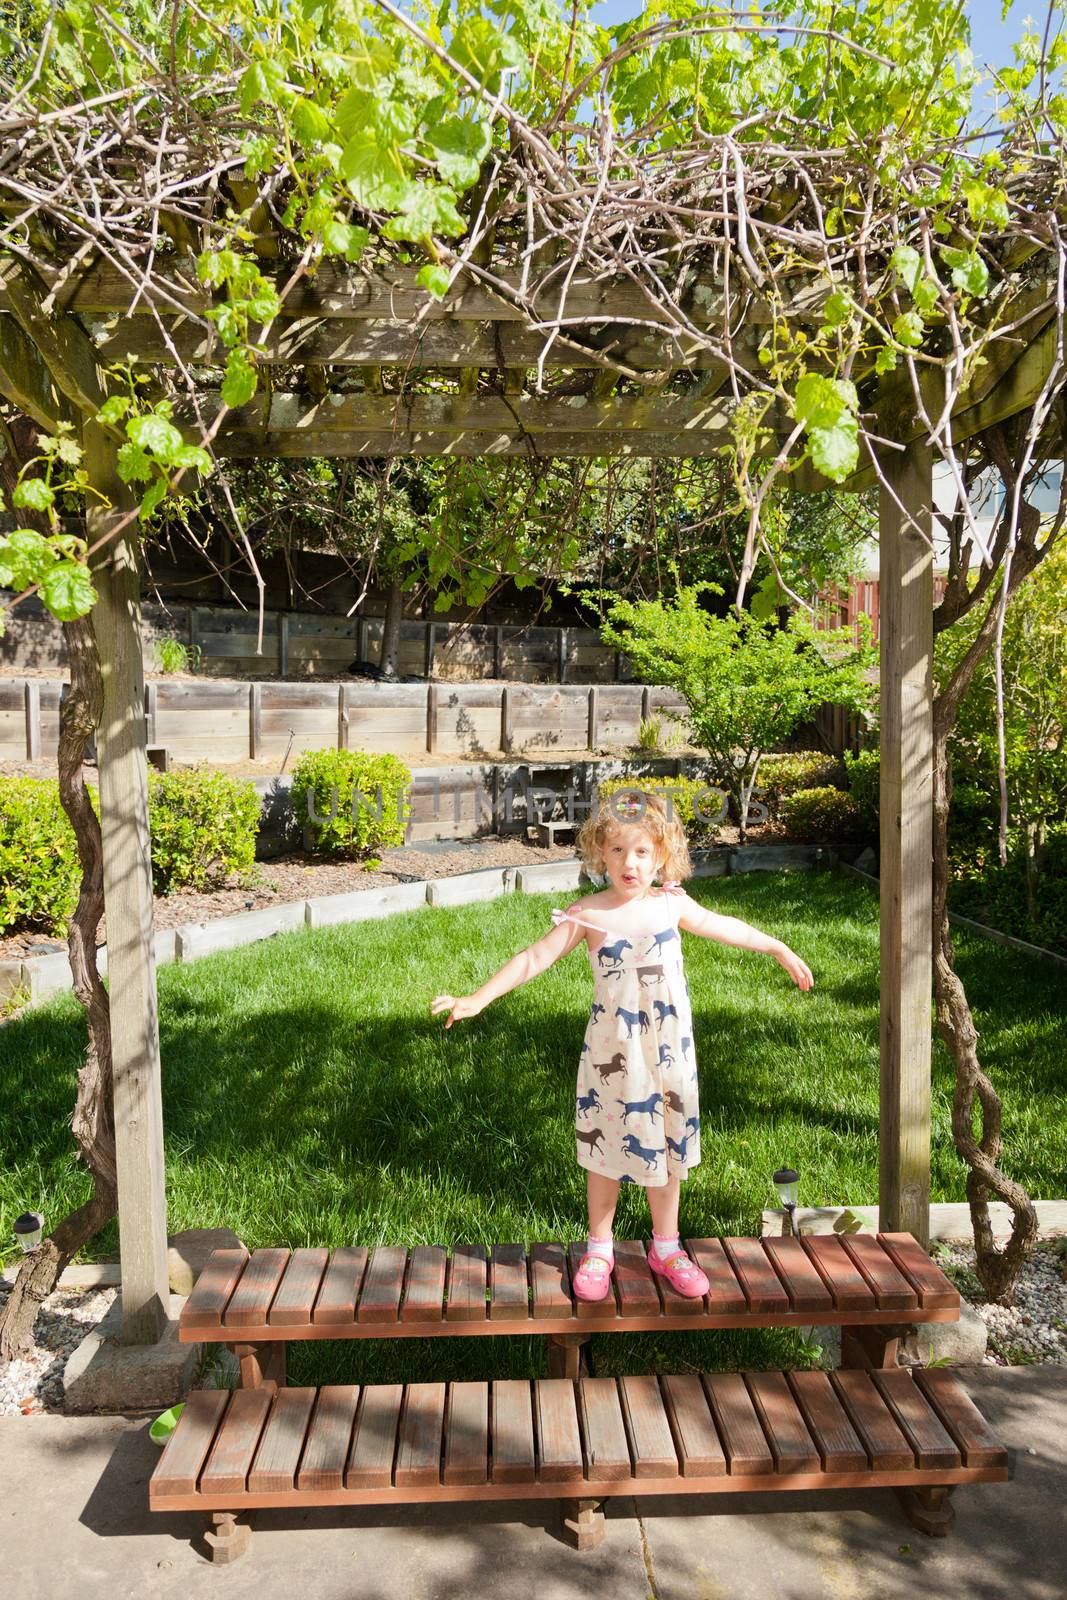 Walking around and playing in the garden on sunny spring day.